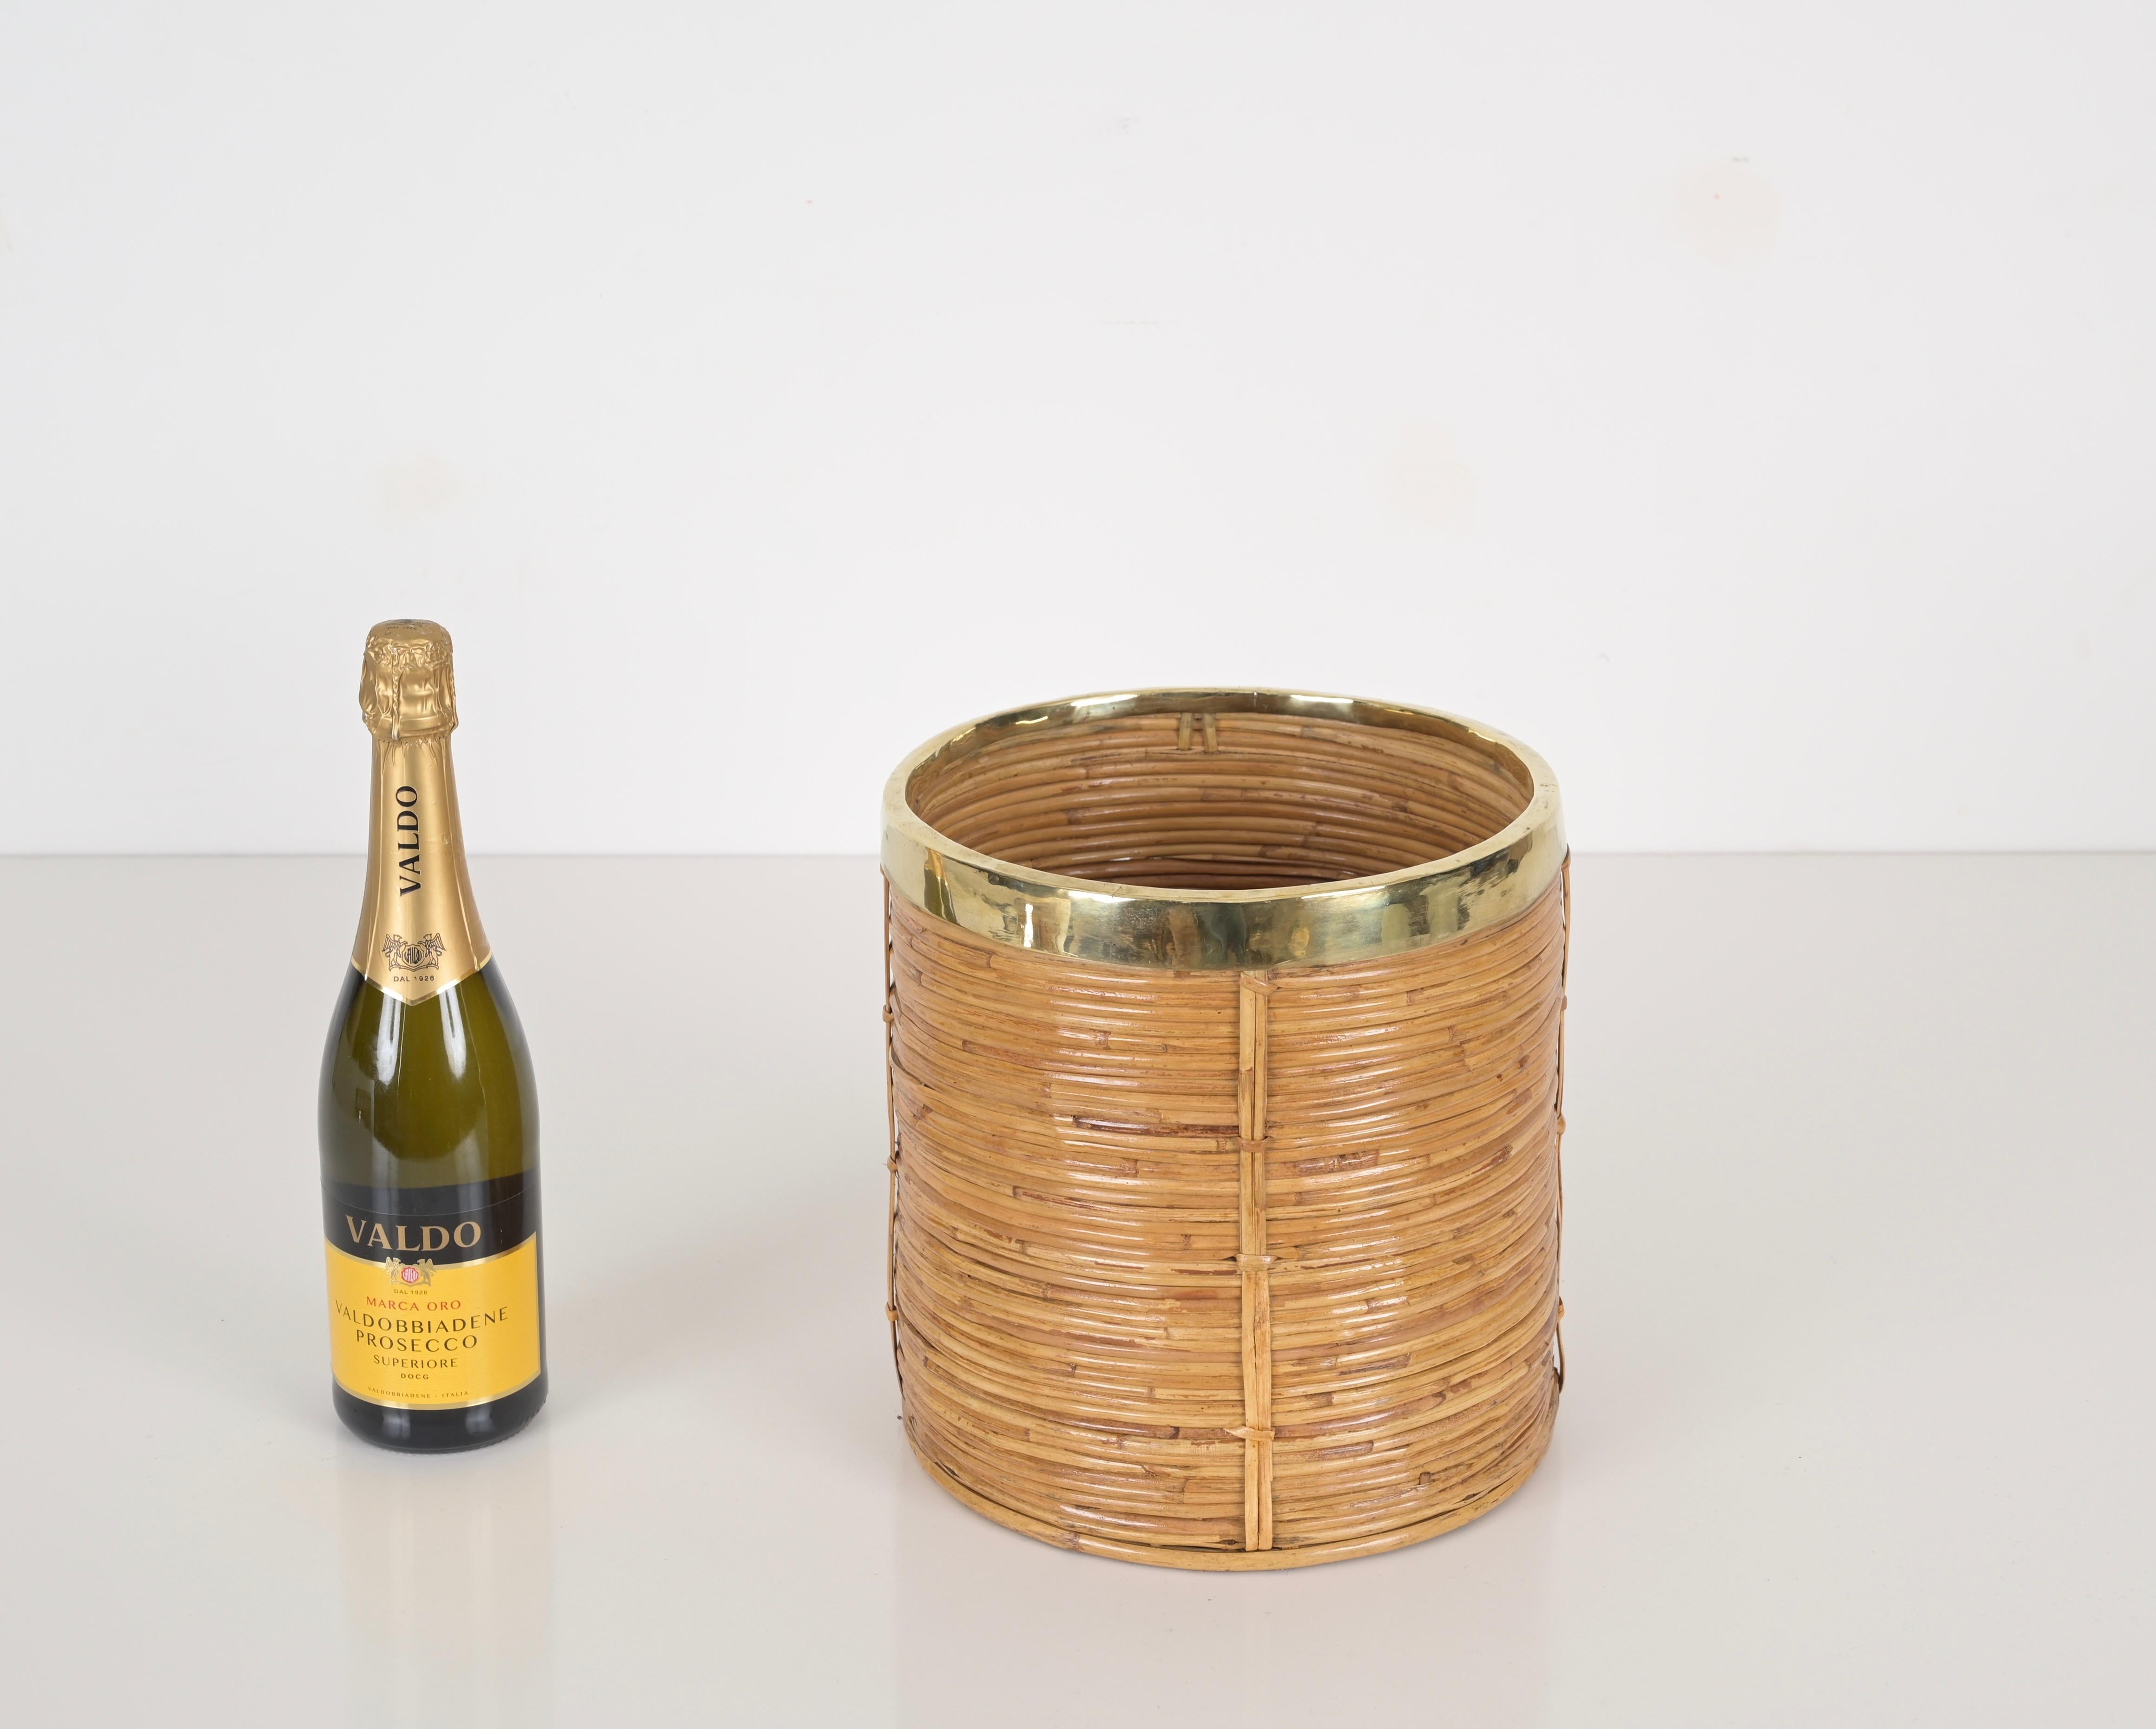 Mid-Century Modern Midcentury Rattan and Brass Planter or Decorative Basket, Italy 1970s For Sale